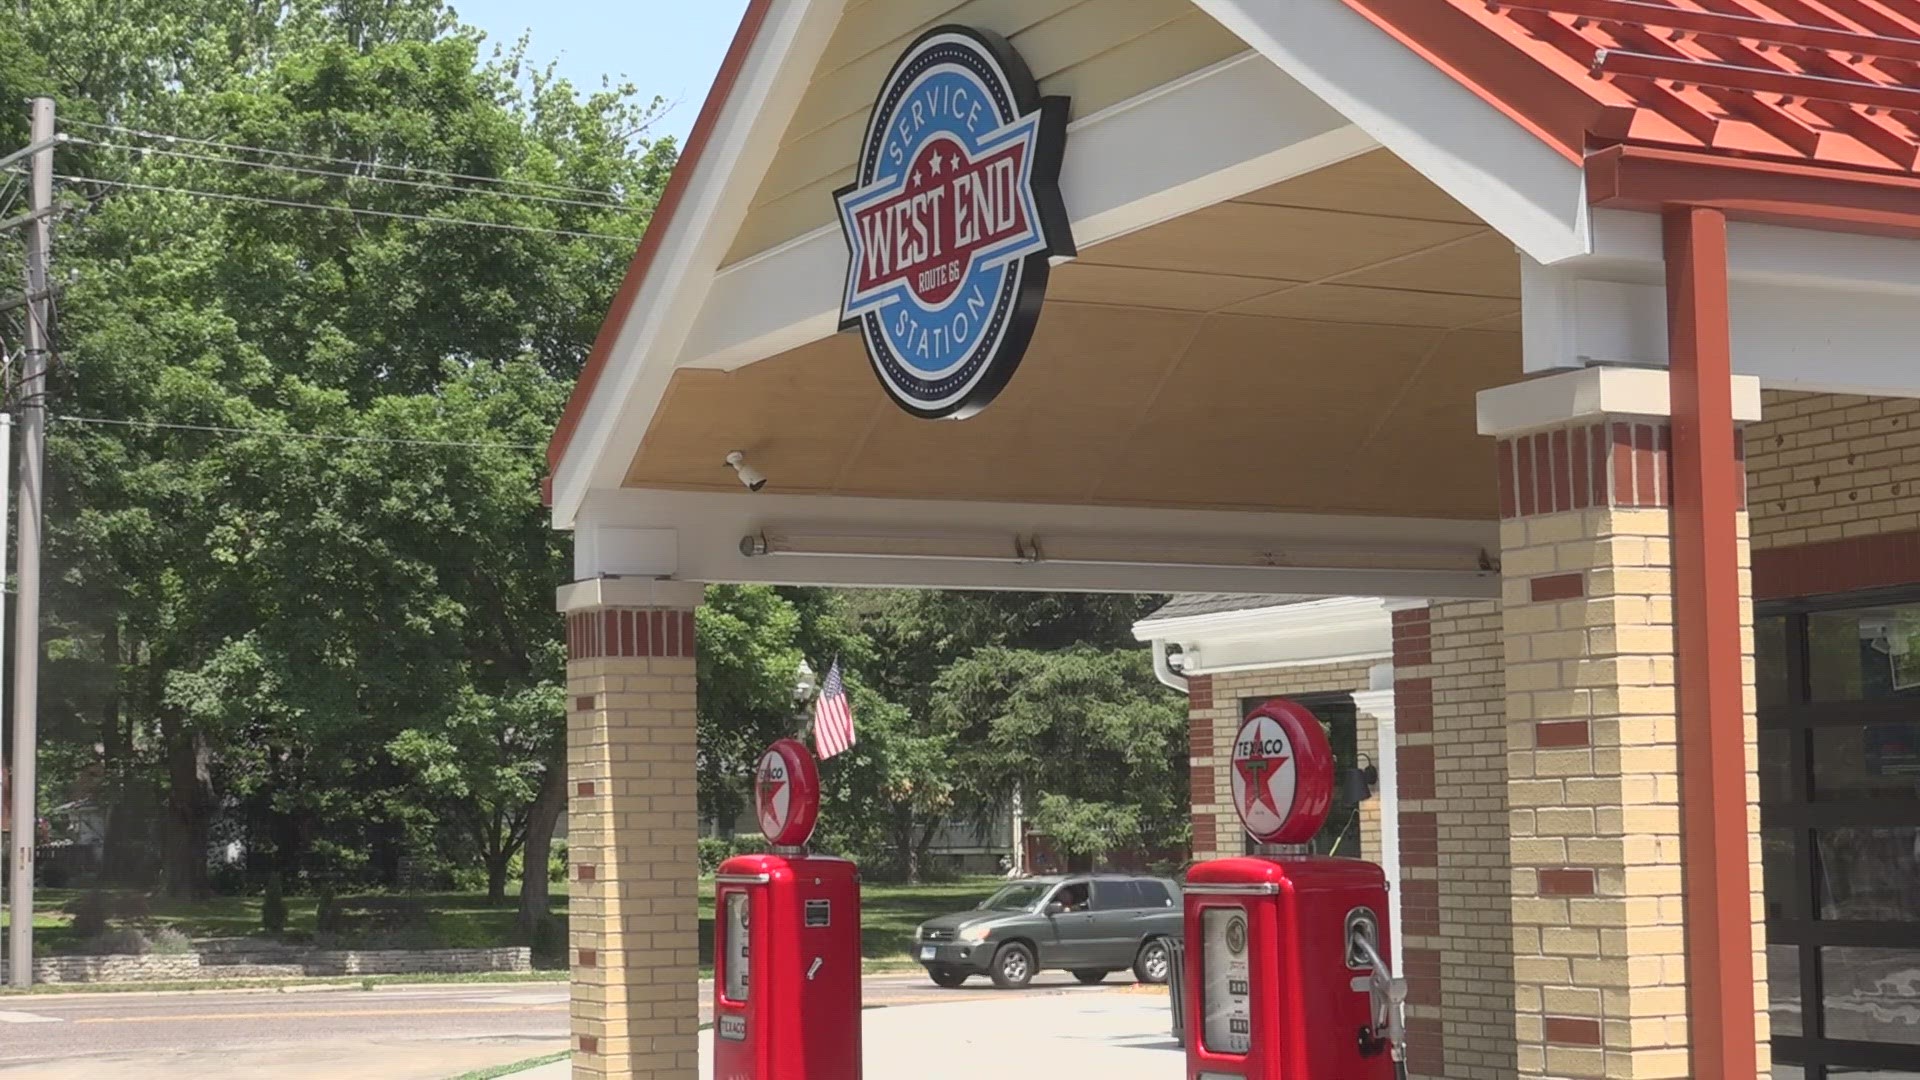 The City of Edwardsville opened the West End Service Station honoring Route 66. It opened Friday.